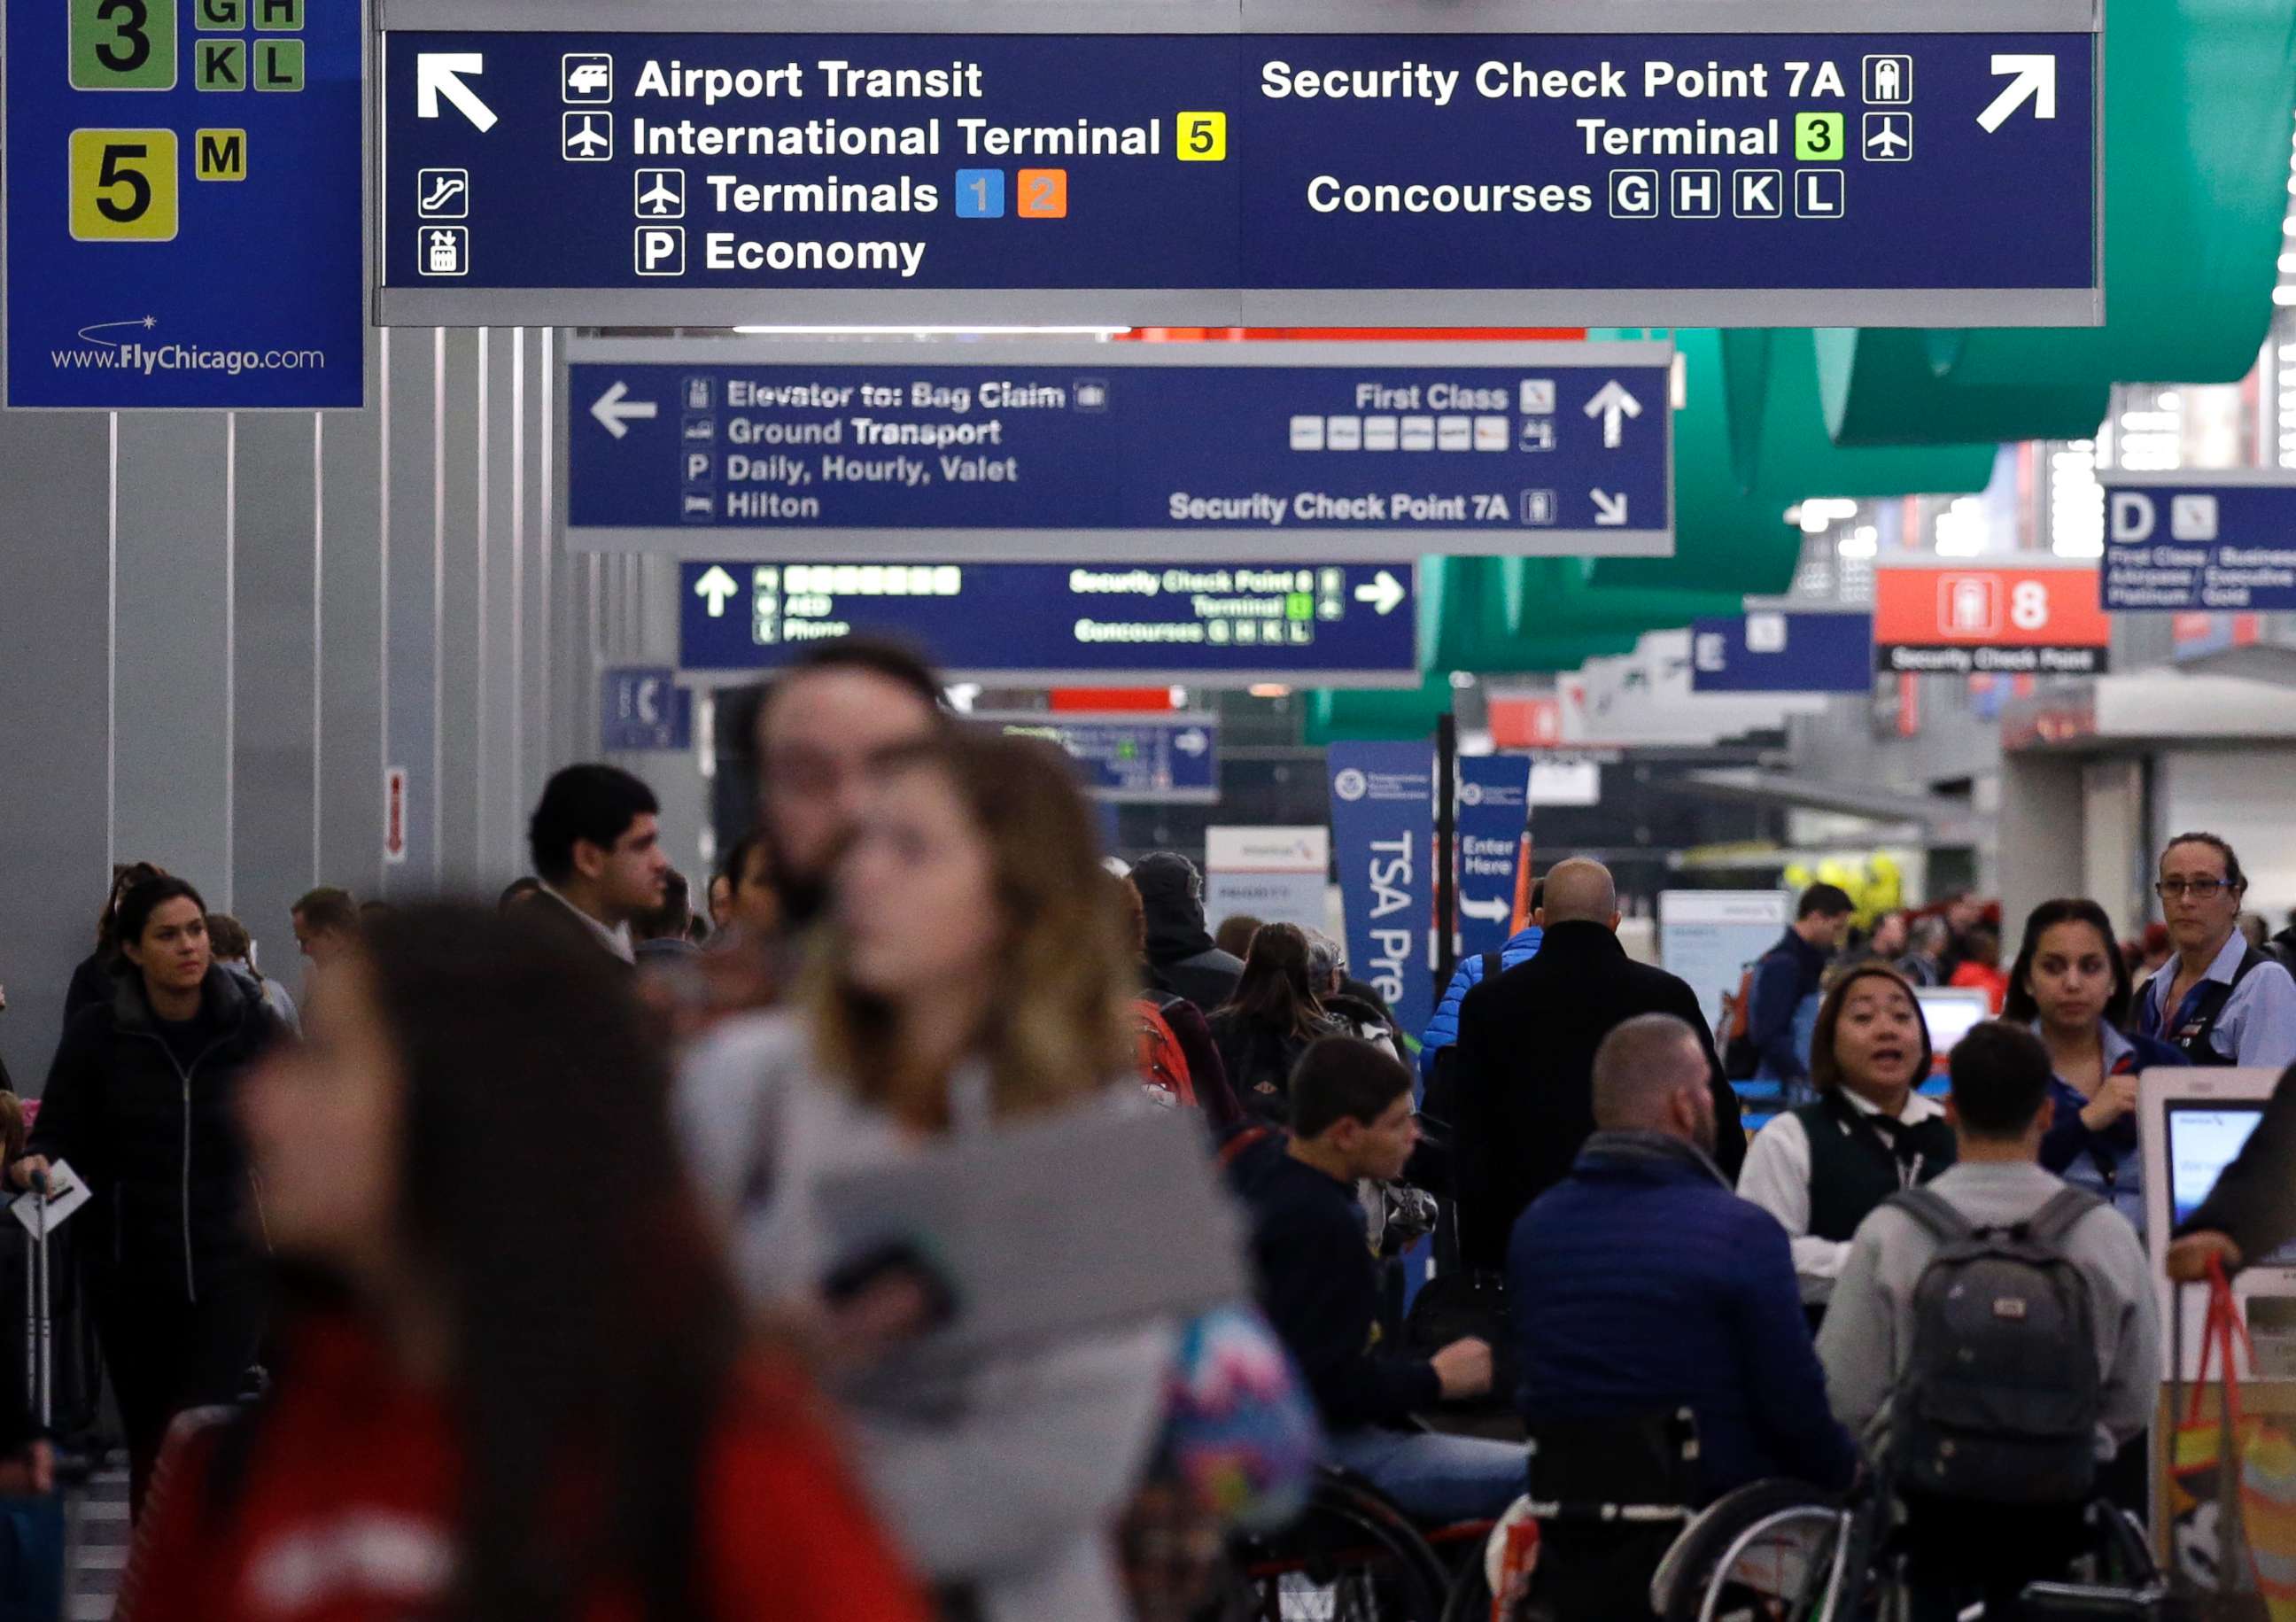 PHOTO: Passengers walk in Terminal 3 at O'Hare airport in Chicago, Nov. 21, 2017.